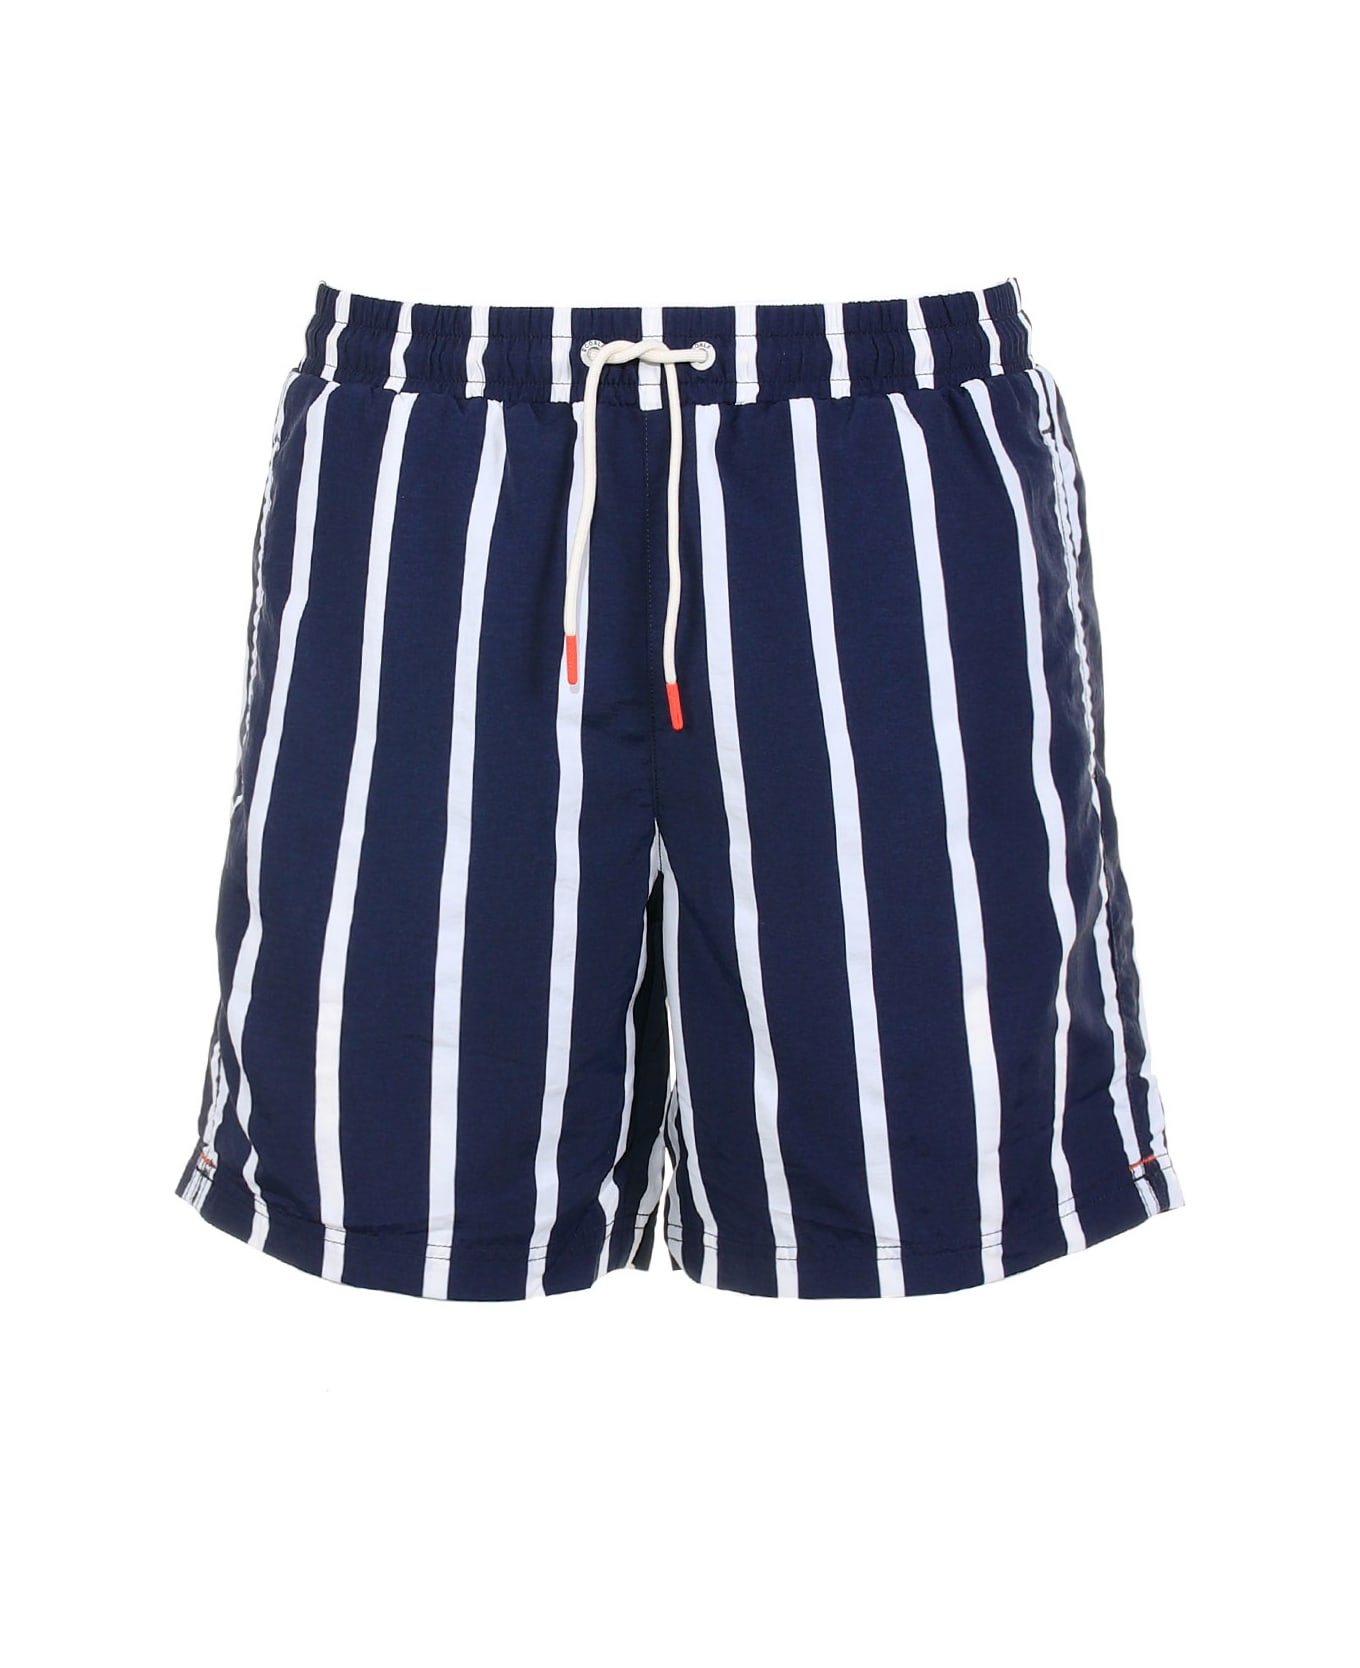 Ecoalf Swimsuit With Drawstring At The Waist - STRIPES 水着